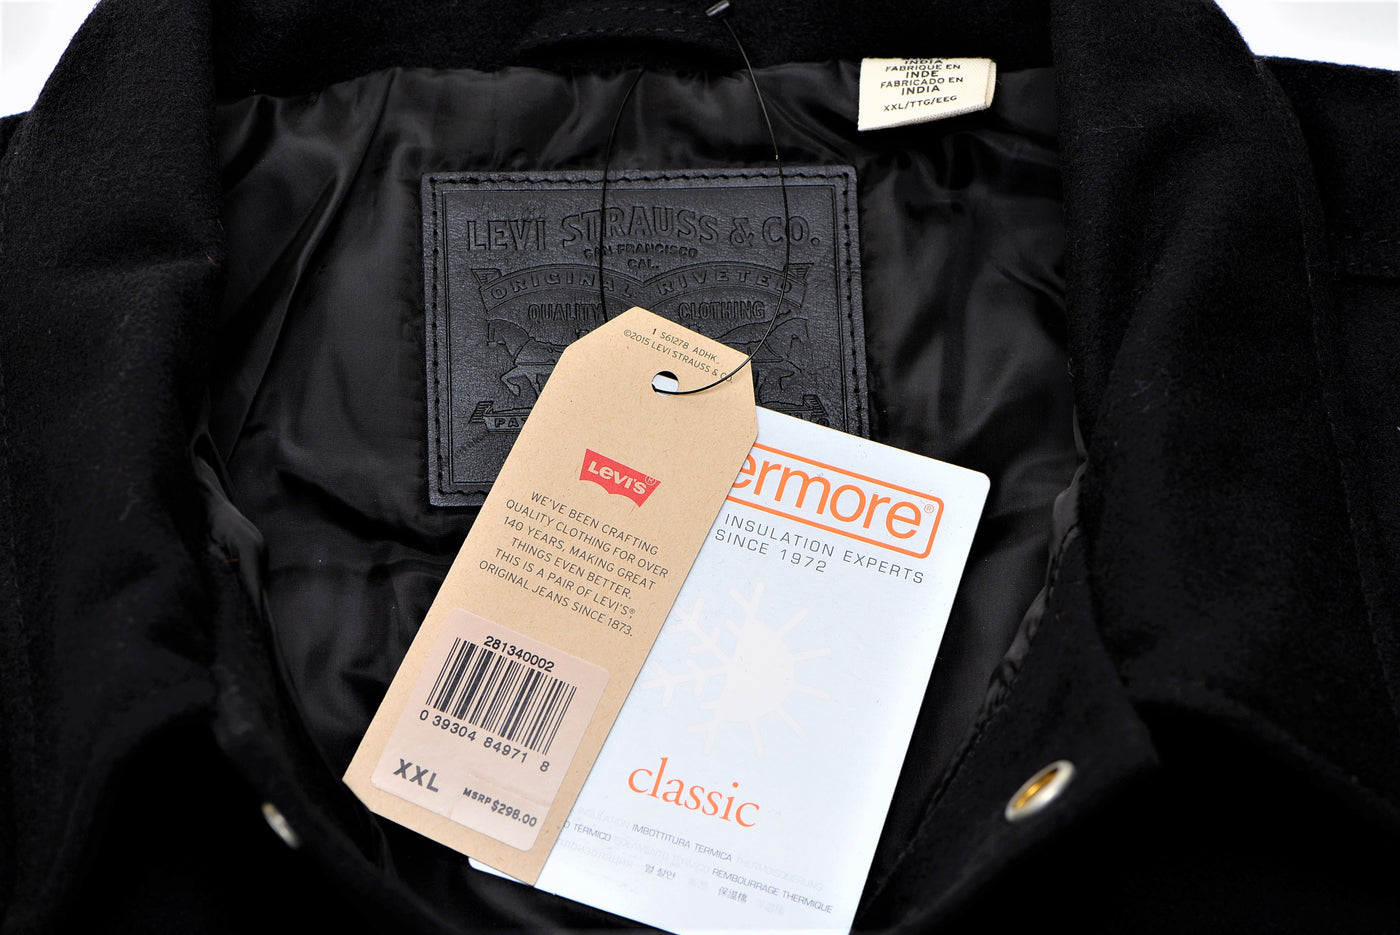 Denim Insulation: Another Way Jeans Can Keep You Warm - Levi Strauss & Co :  Levi Strauss & Co